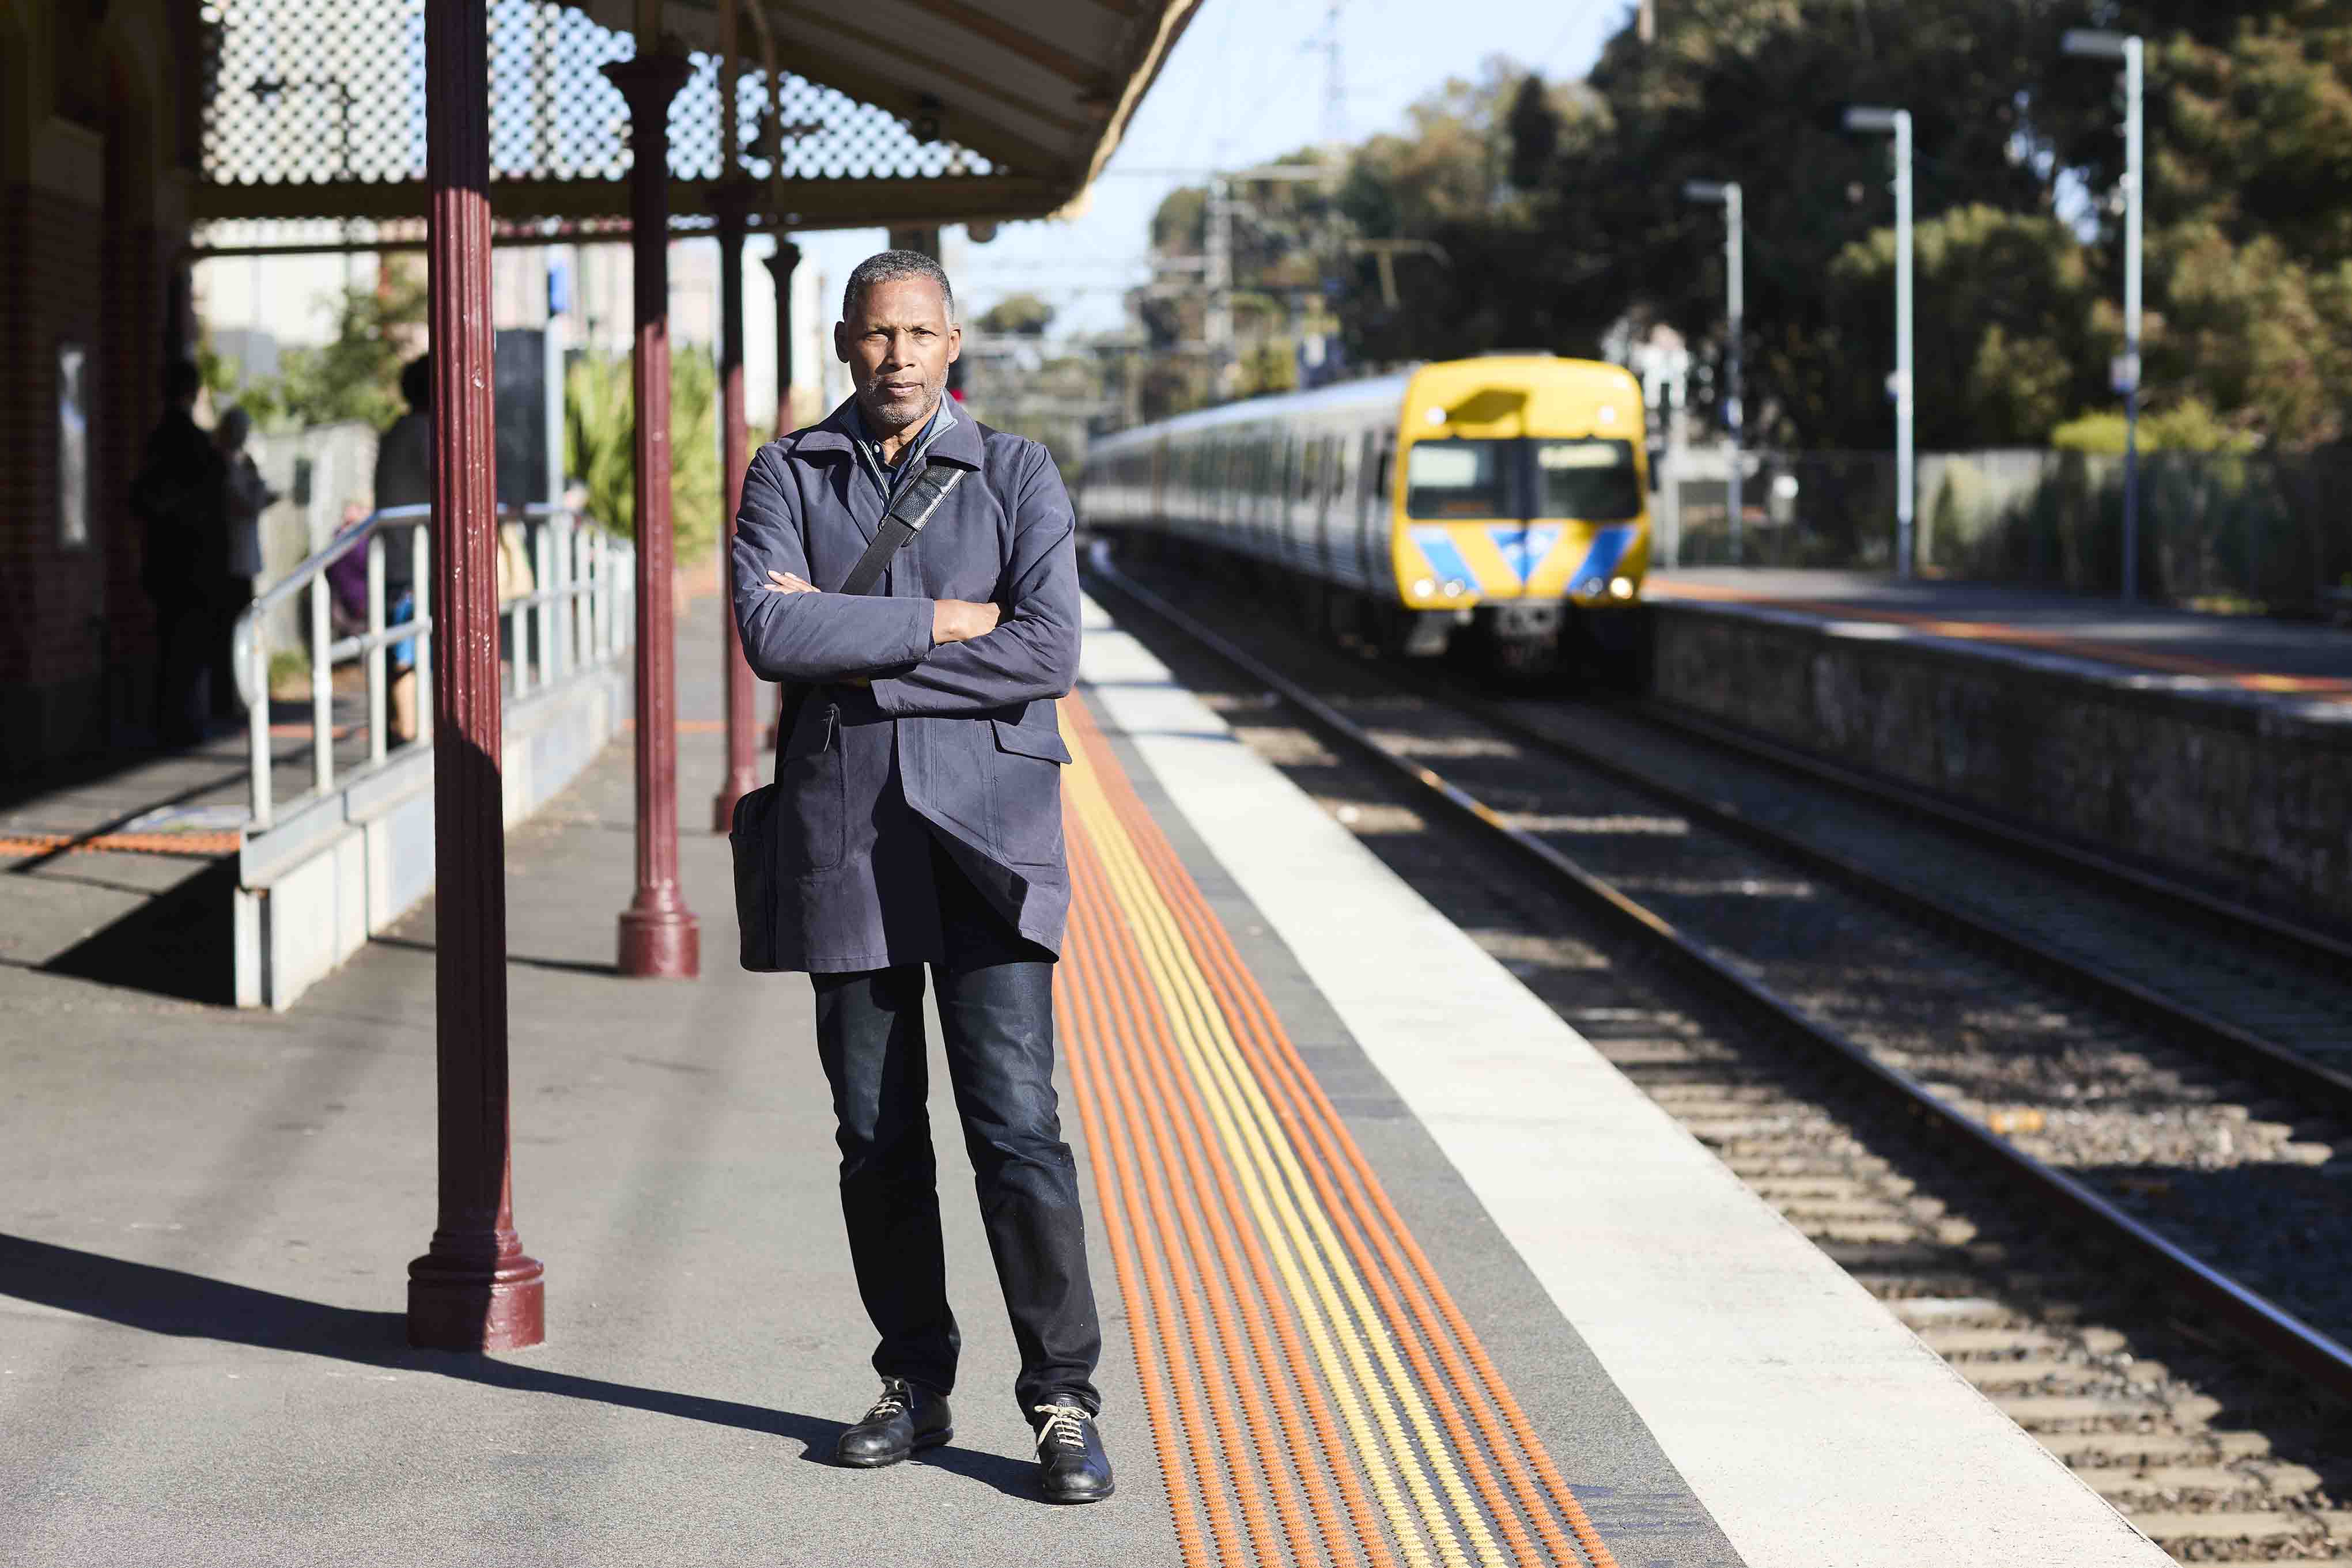 Image shows a man standing on a train platform with his arms crossed. There is a train approaching in the background.